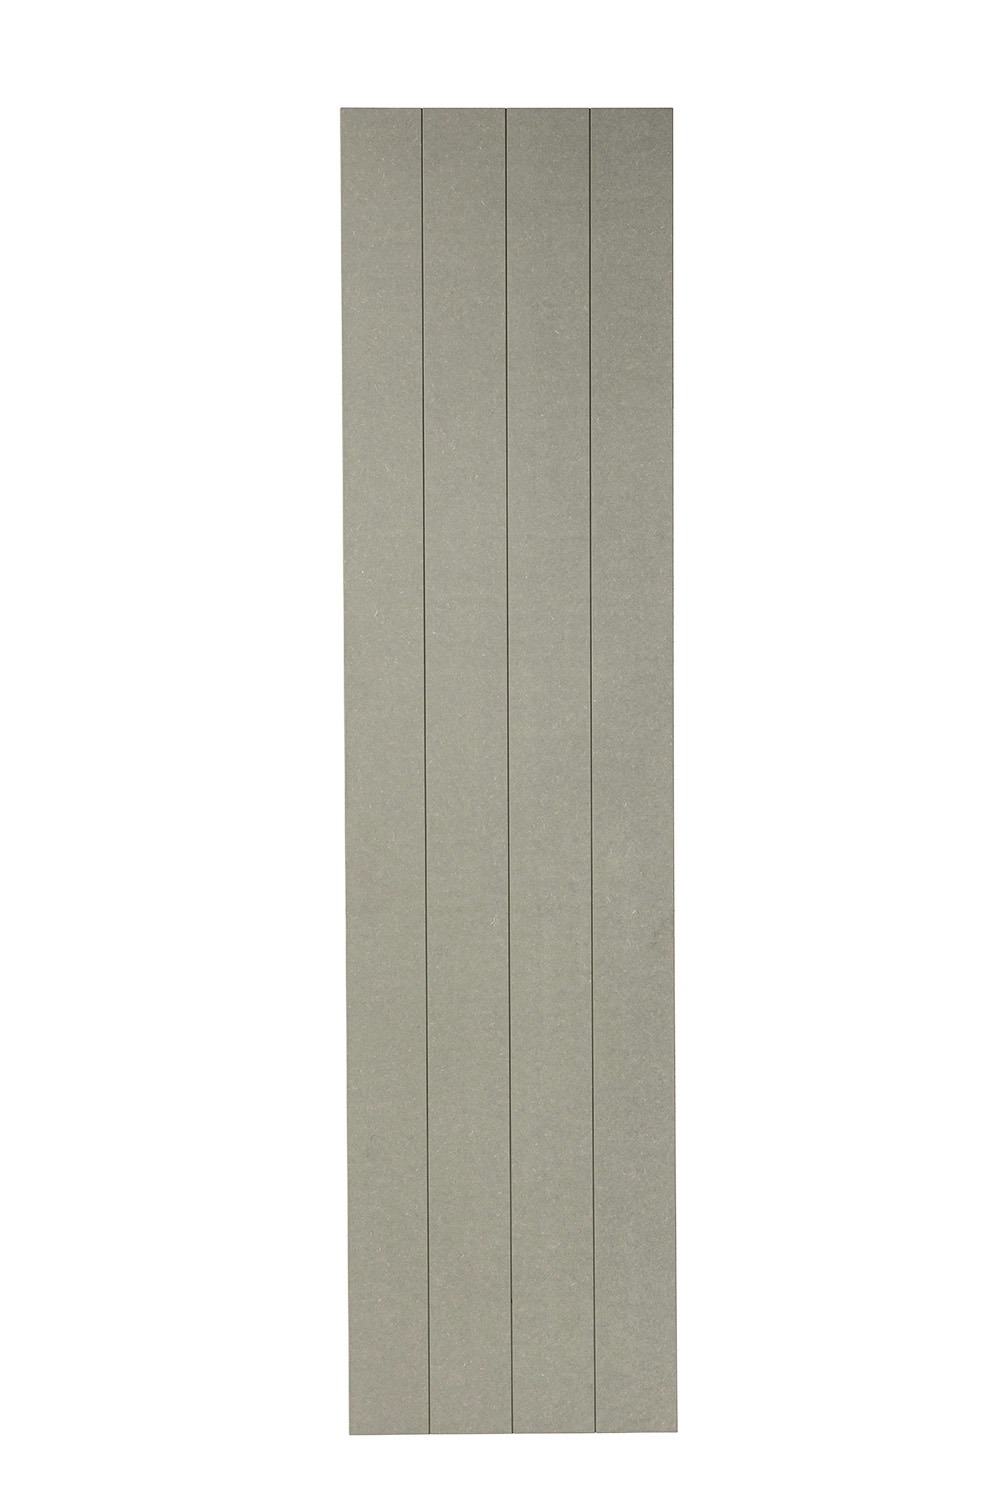 full product image of a 2.4m tongue and groove panel 